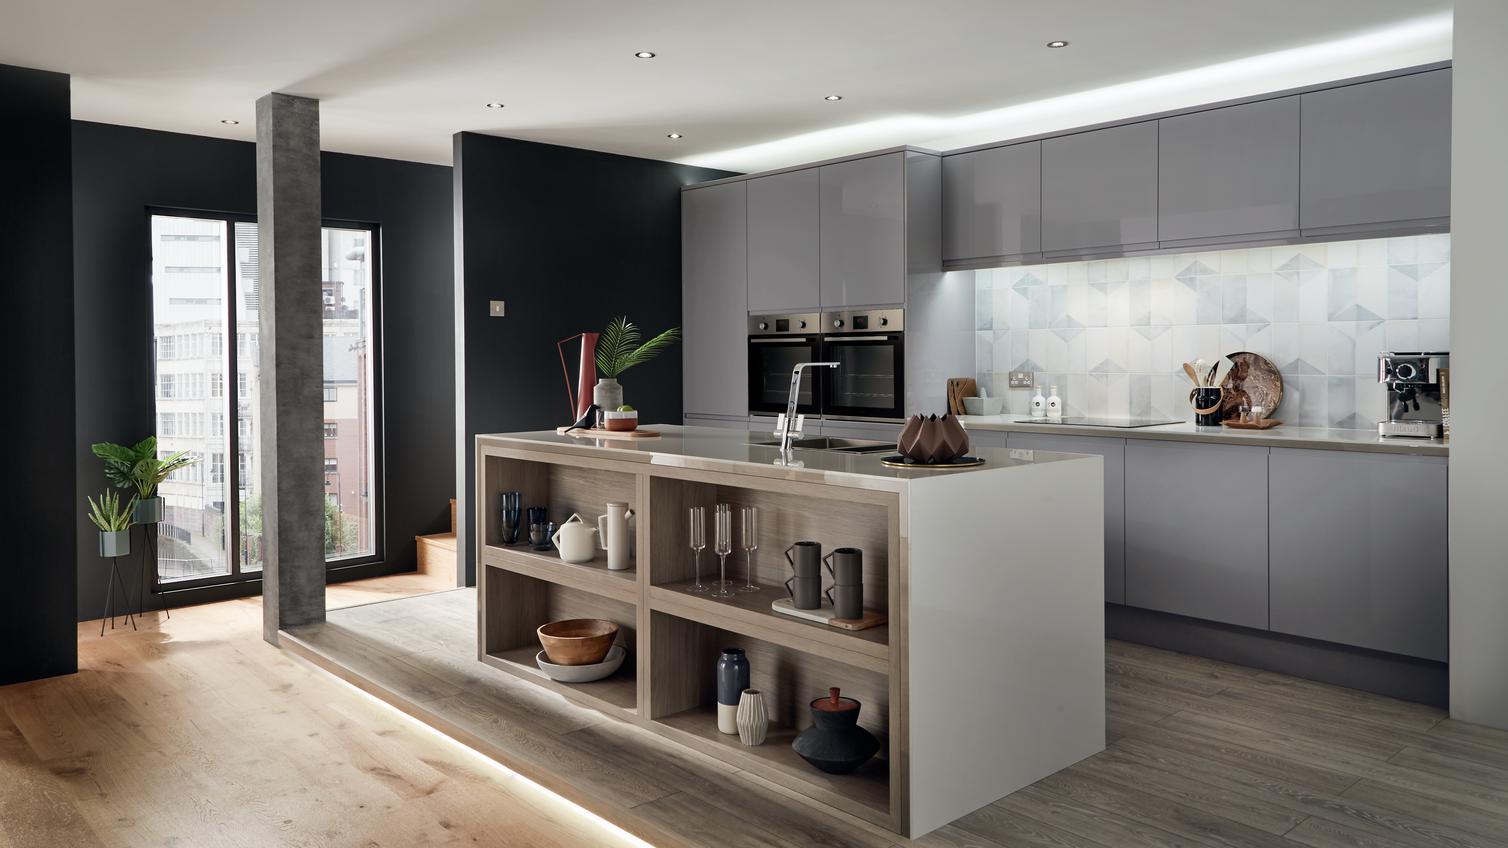 Slate grey modern handleless gloss kitchen in an apartment setting including kitchen island incorporating exposed shelving.